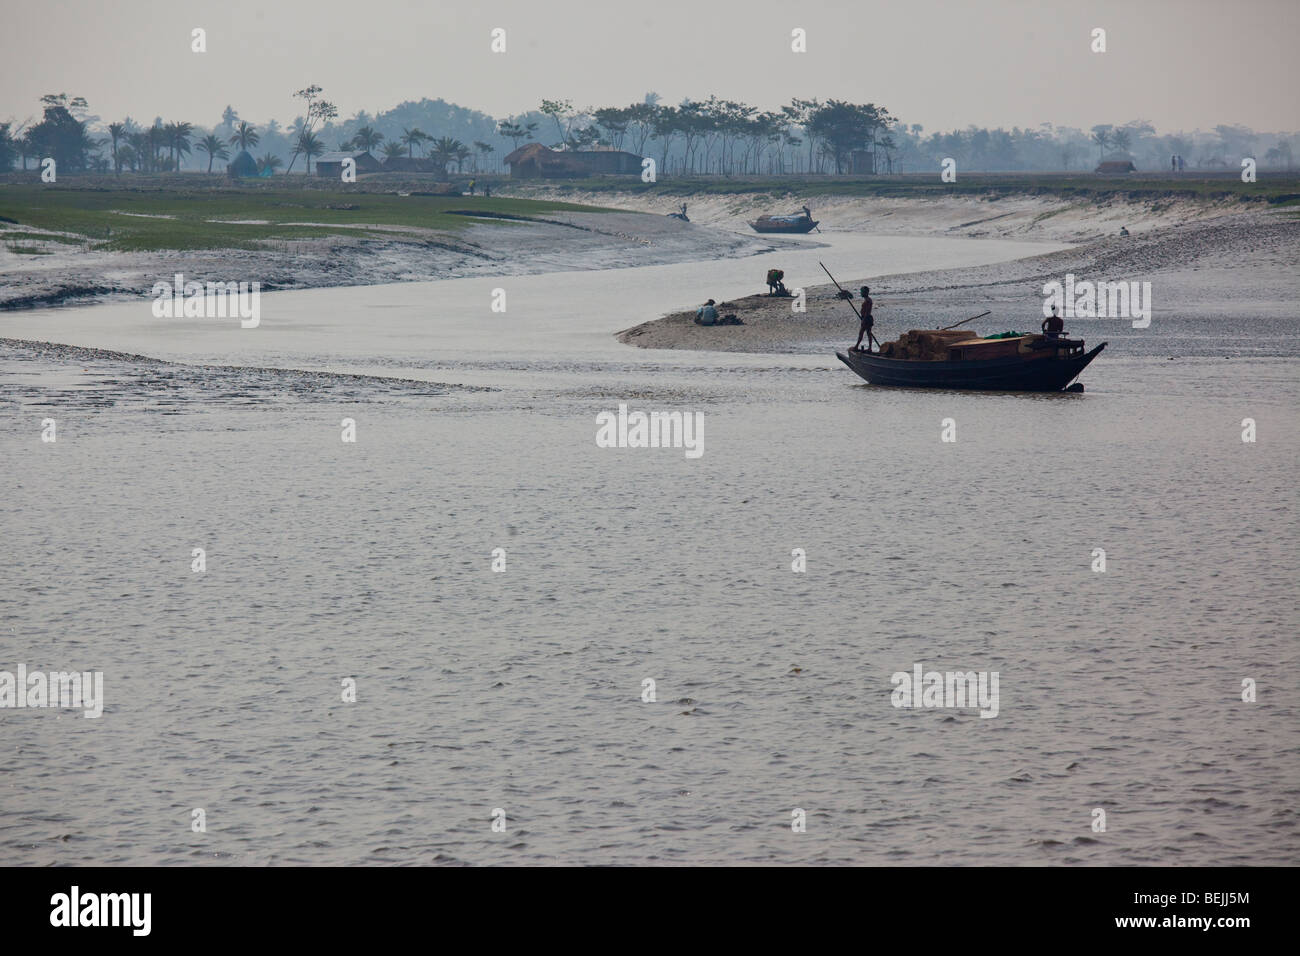 Seen from the Rocket: Brahmaputra River in Bangladesh Stock Photo